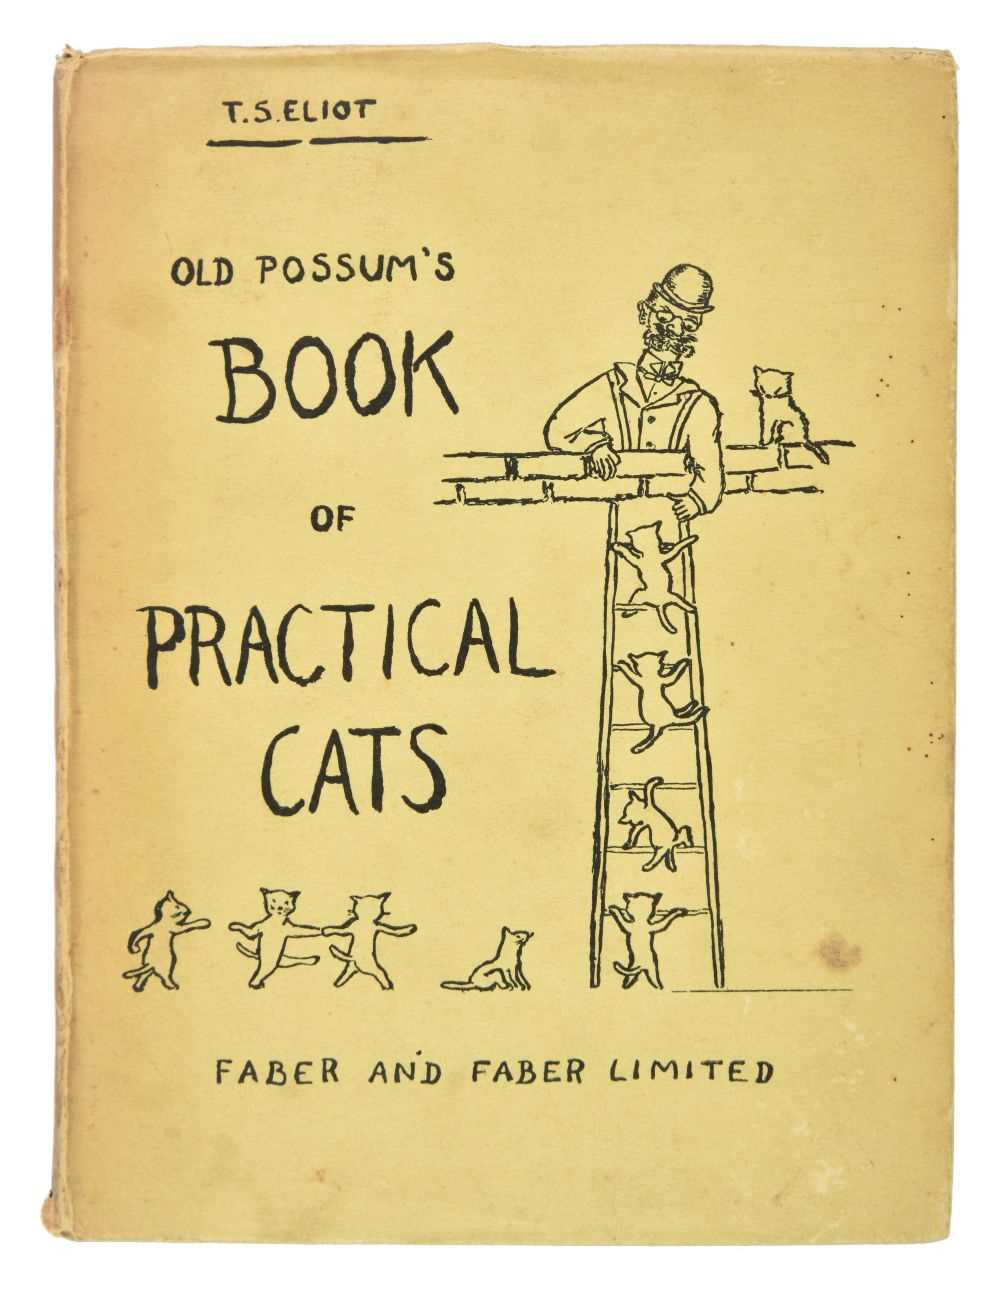 Lot 674 - Eliot (T. S.) Old Possum's Book of Practical Cats, 1st edition, 1939